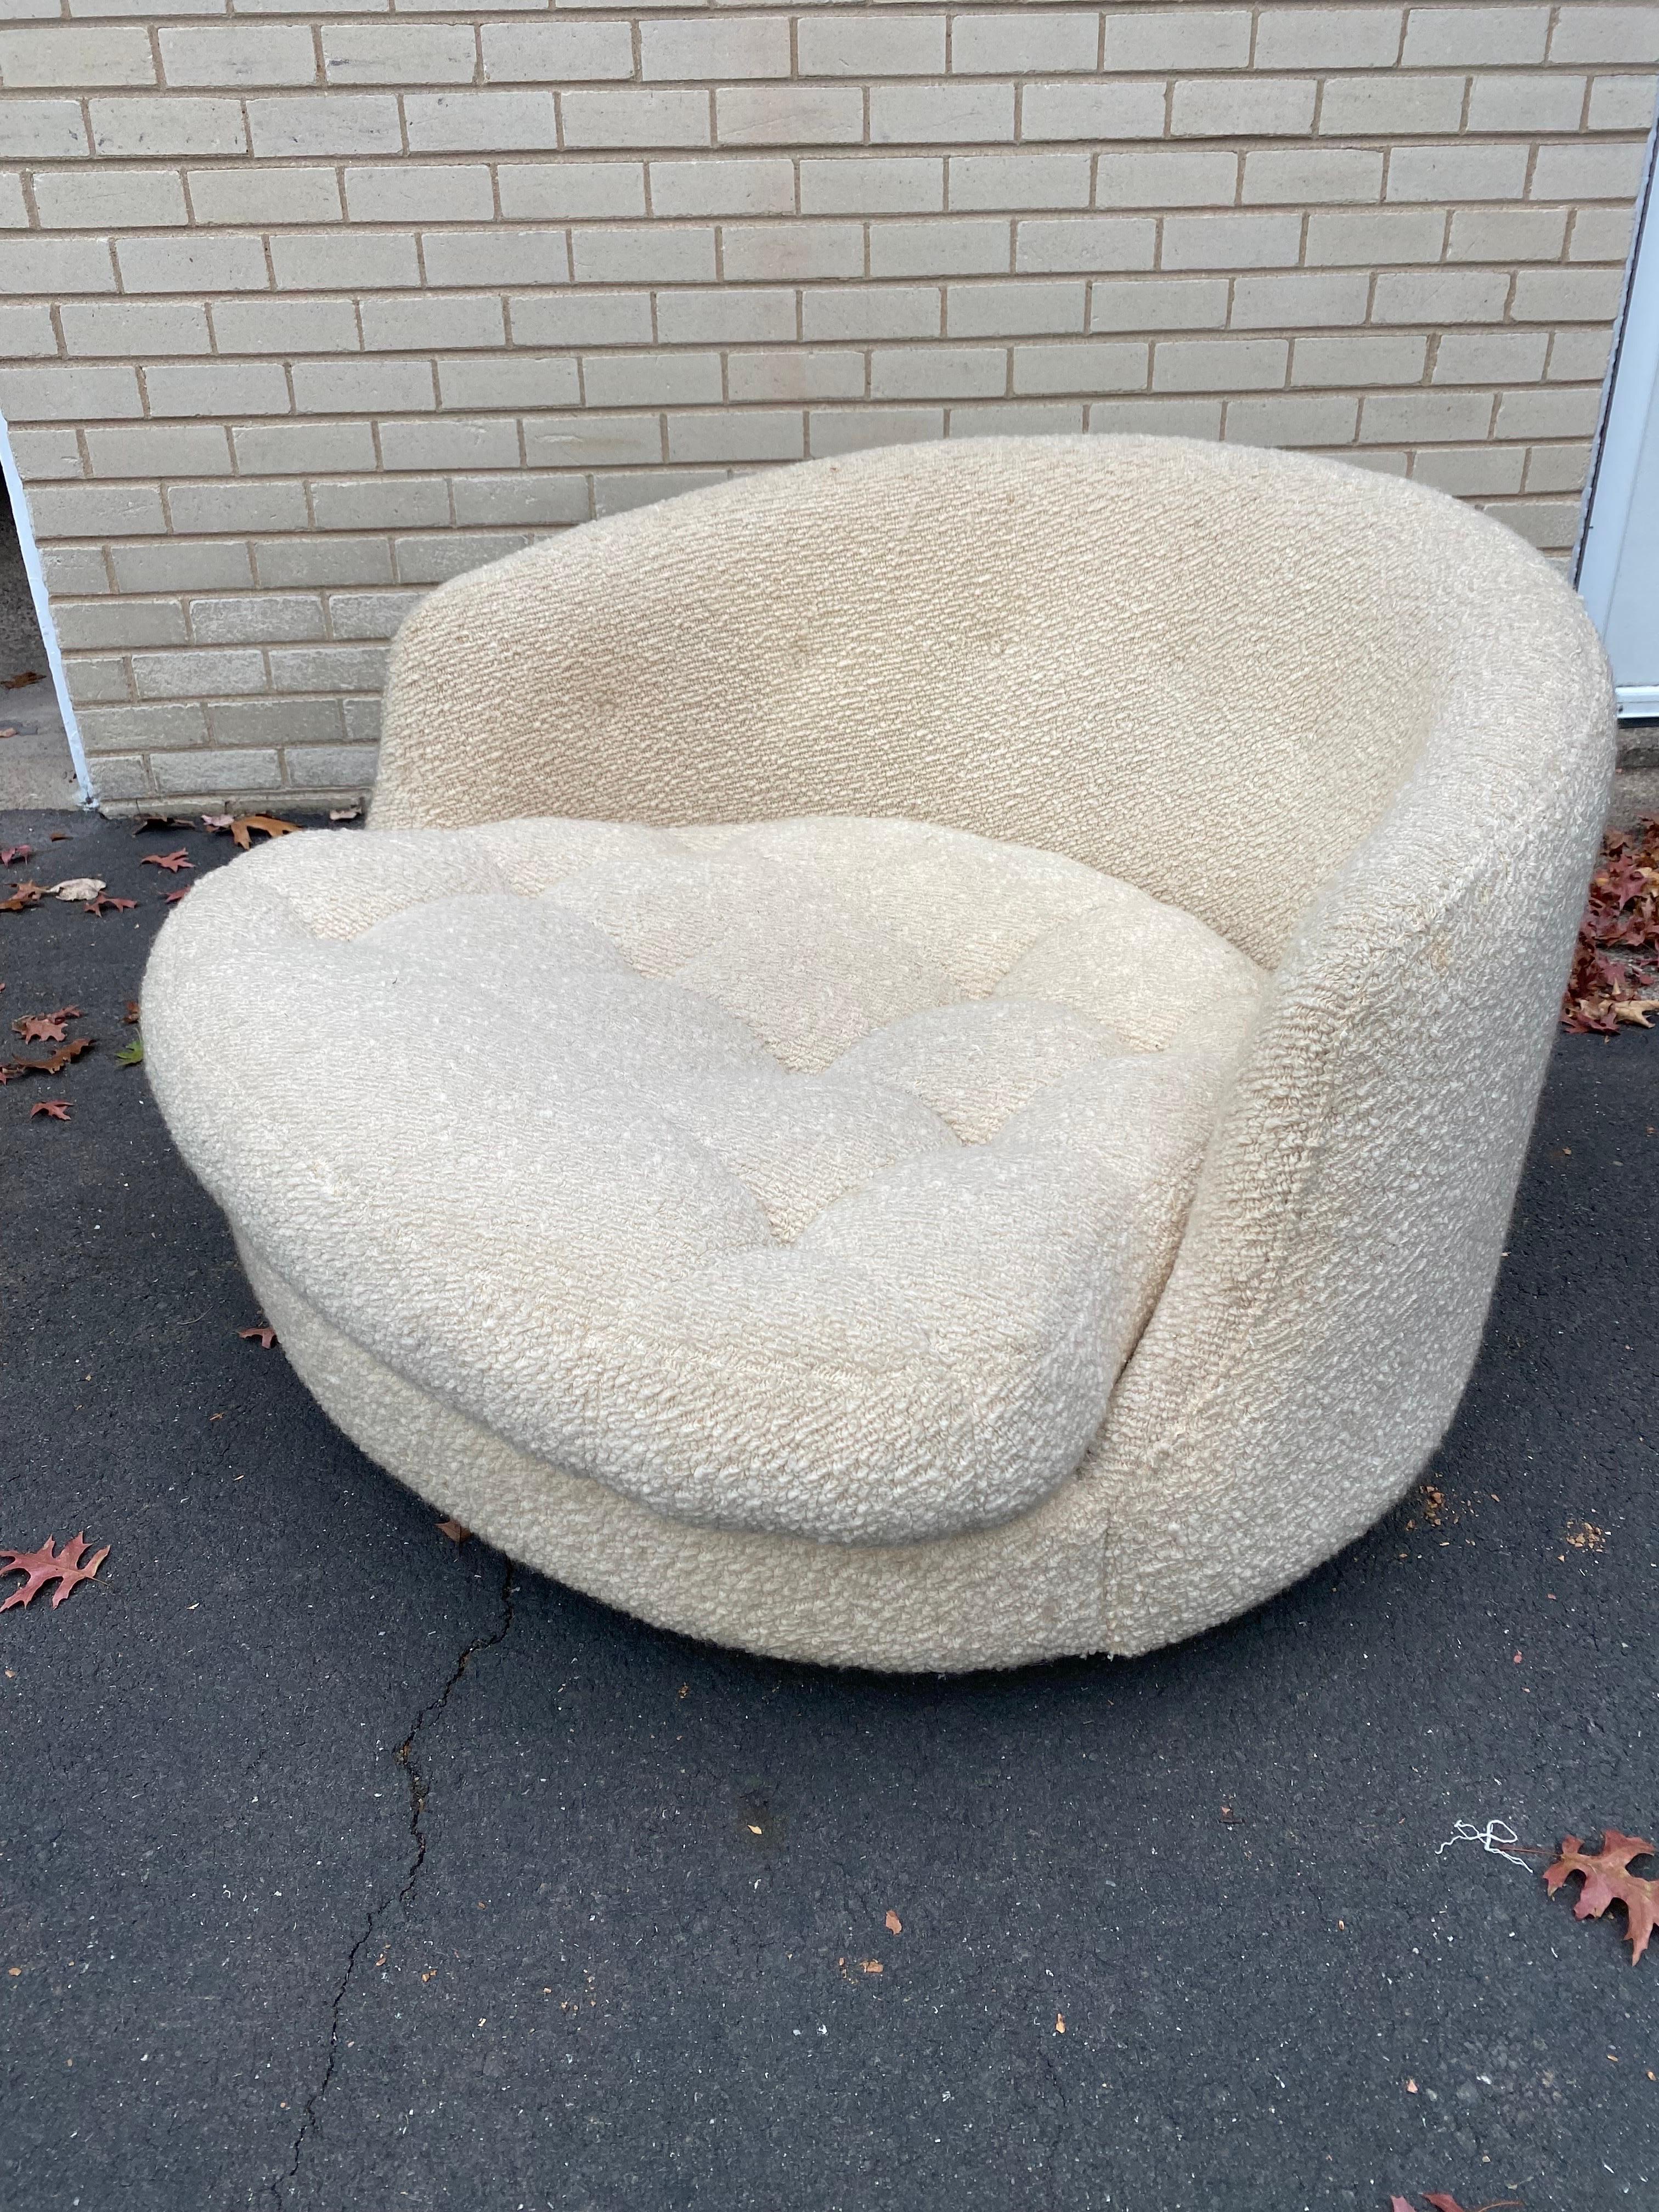 Milo Baughman for Thayer Coggin Round Oversized Lounge chair in an ivory boucle!  Bought from the Original owners, chair is in great shape.  Grouping of period pillows included!  Chair sits great!  Lot's of room!  Ready for that party!